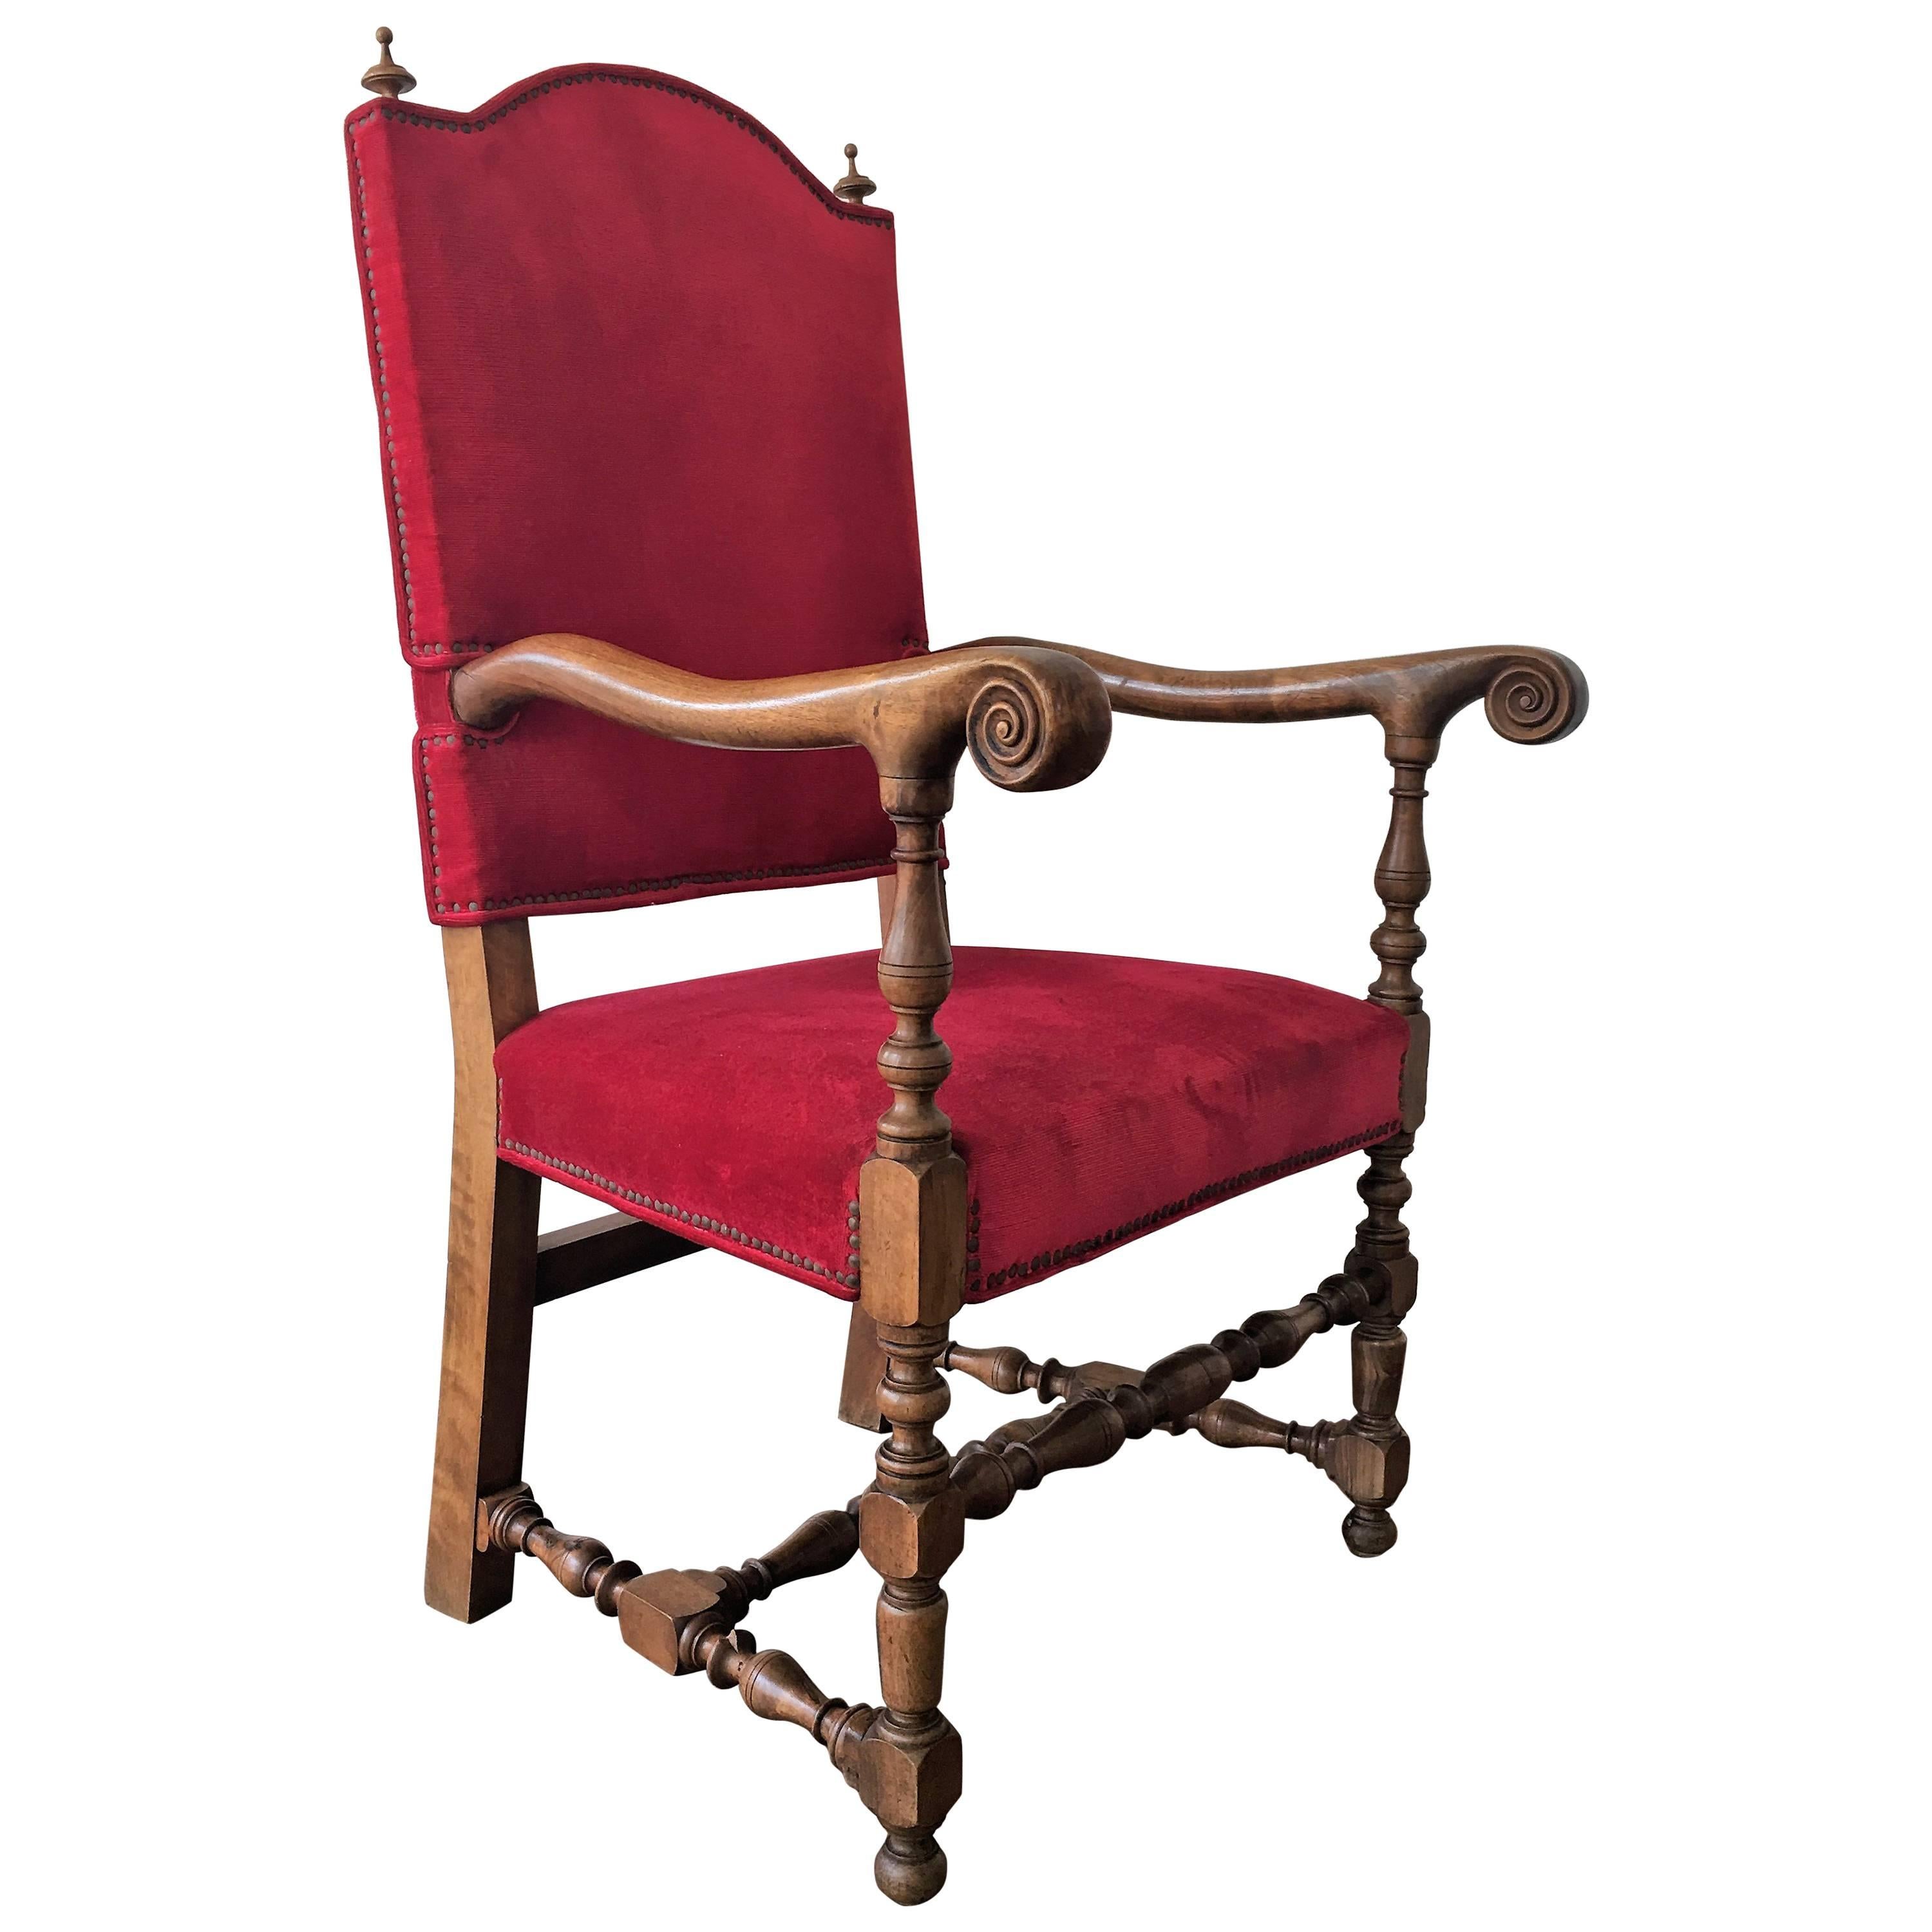 19th Century Louis XIII Style Fauteuils Throne Armchair in Red Velvet